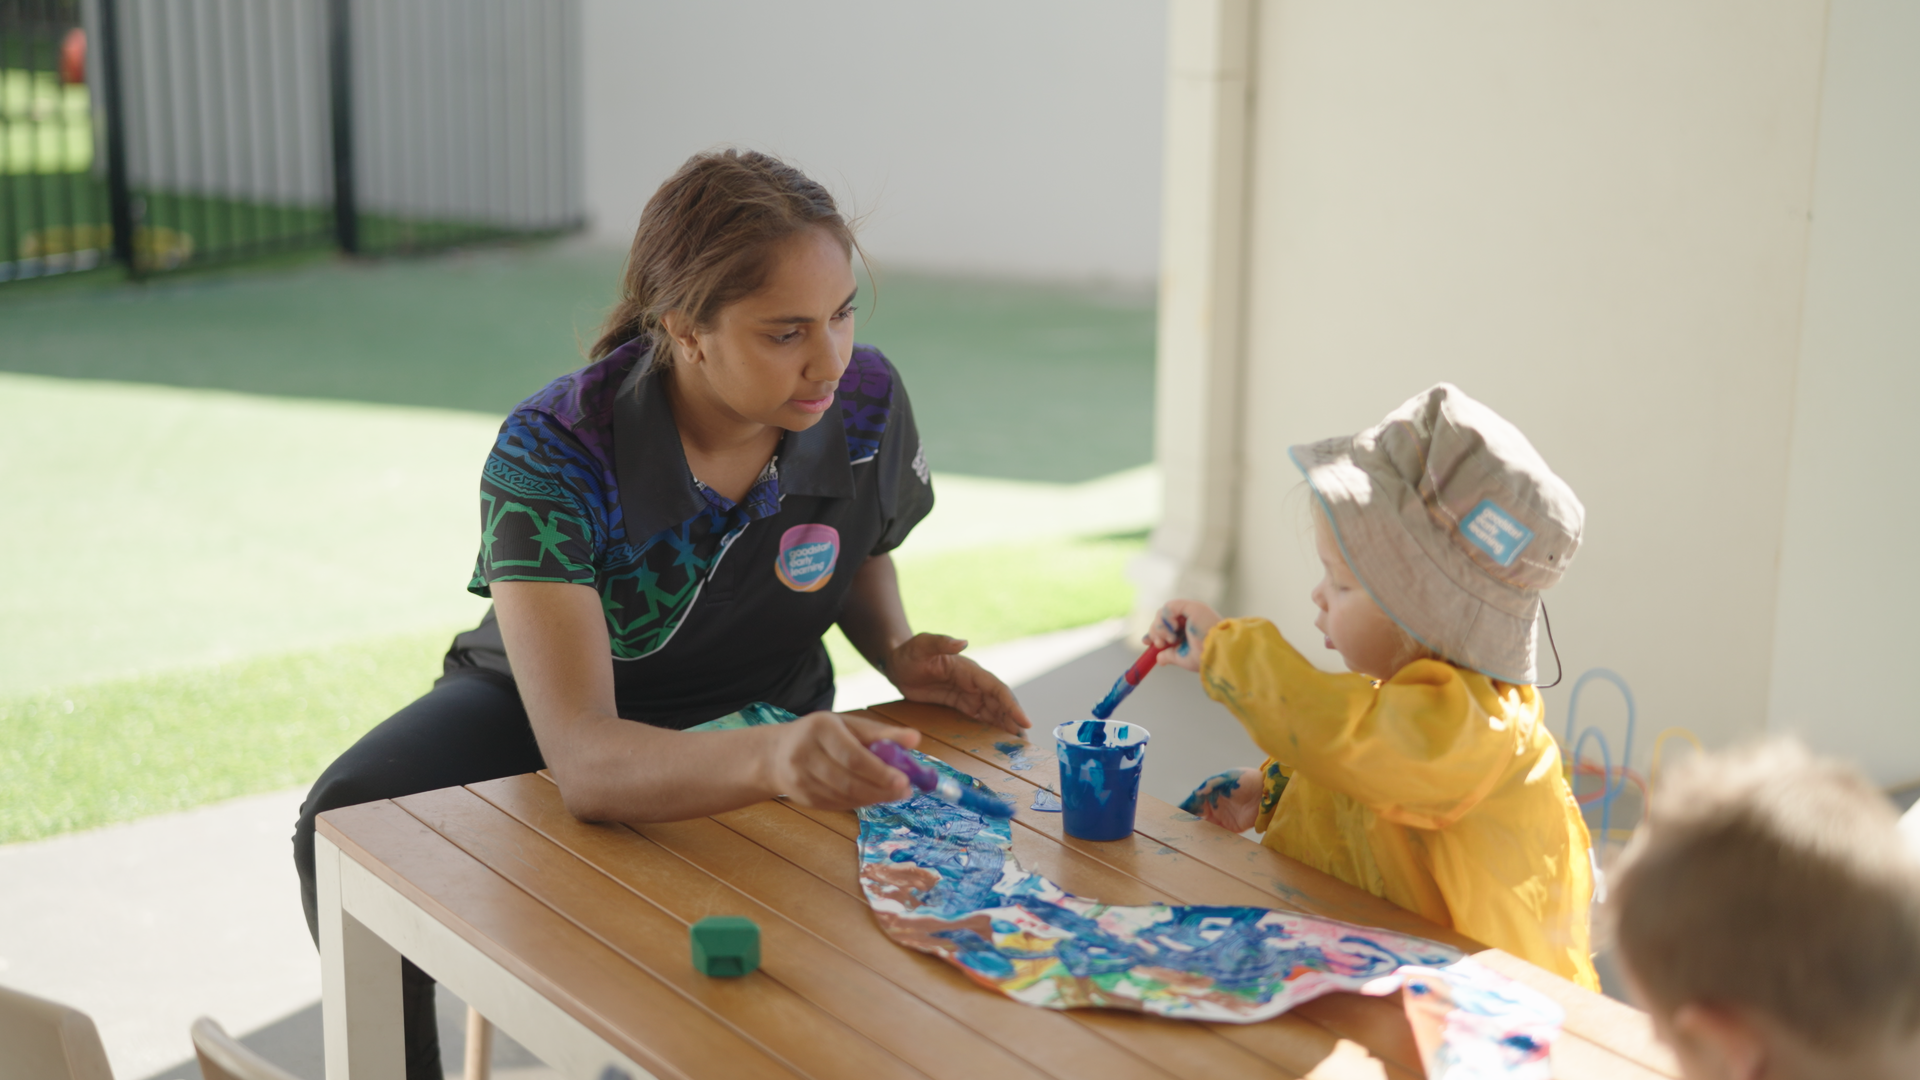 Djilawaa, trainee educator at Goodstart Stratton, working on some art with a child at the centre